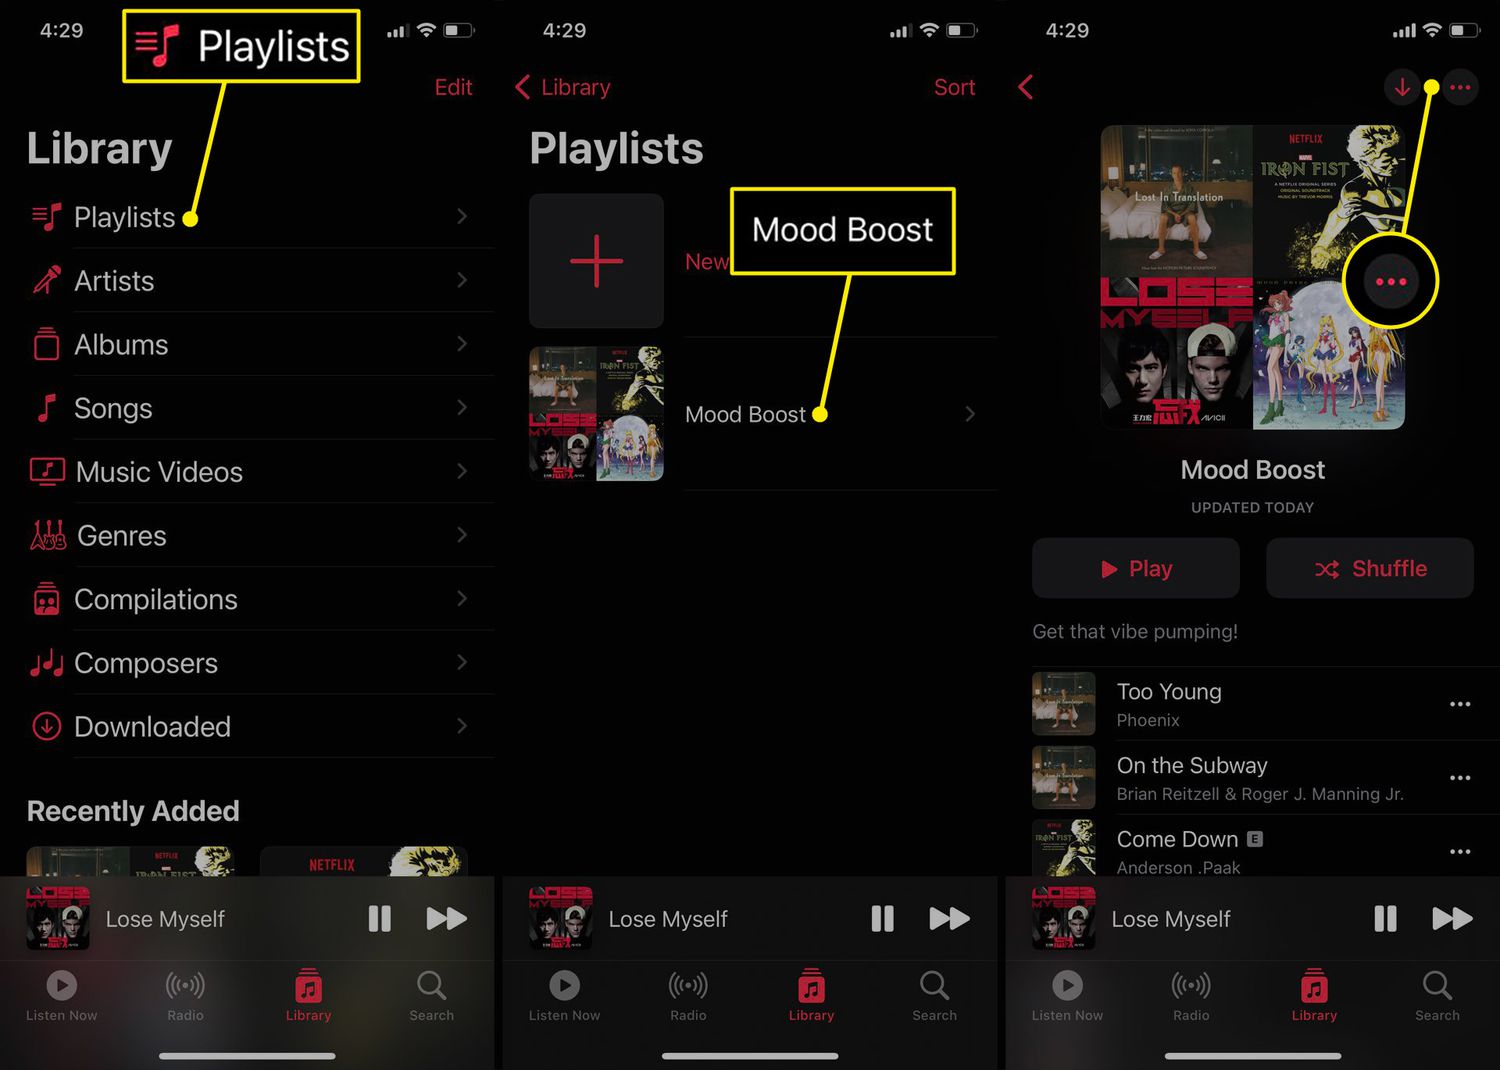 how-to-sort-songs-by-title-in-apple-music-with-ios-10